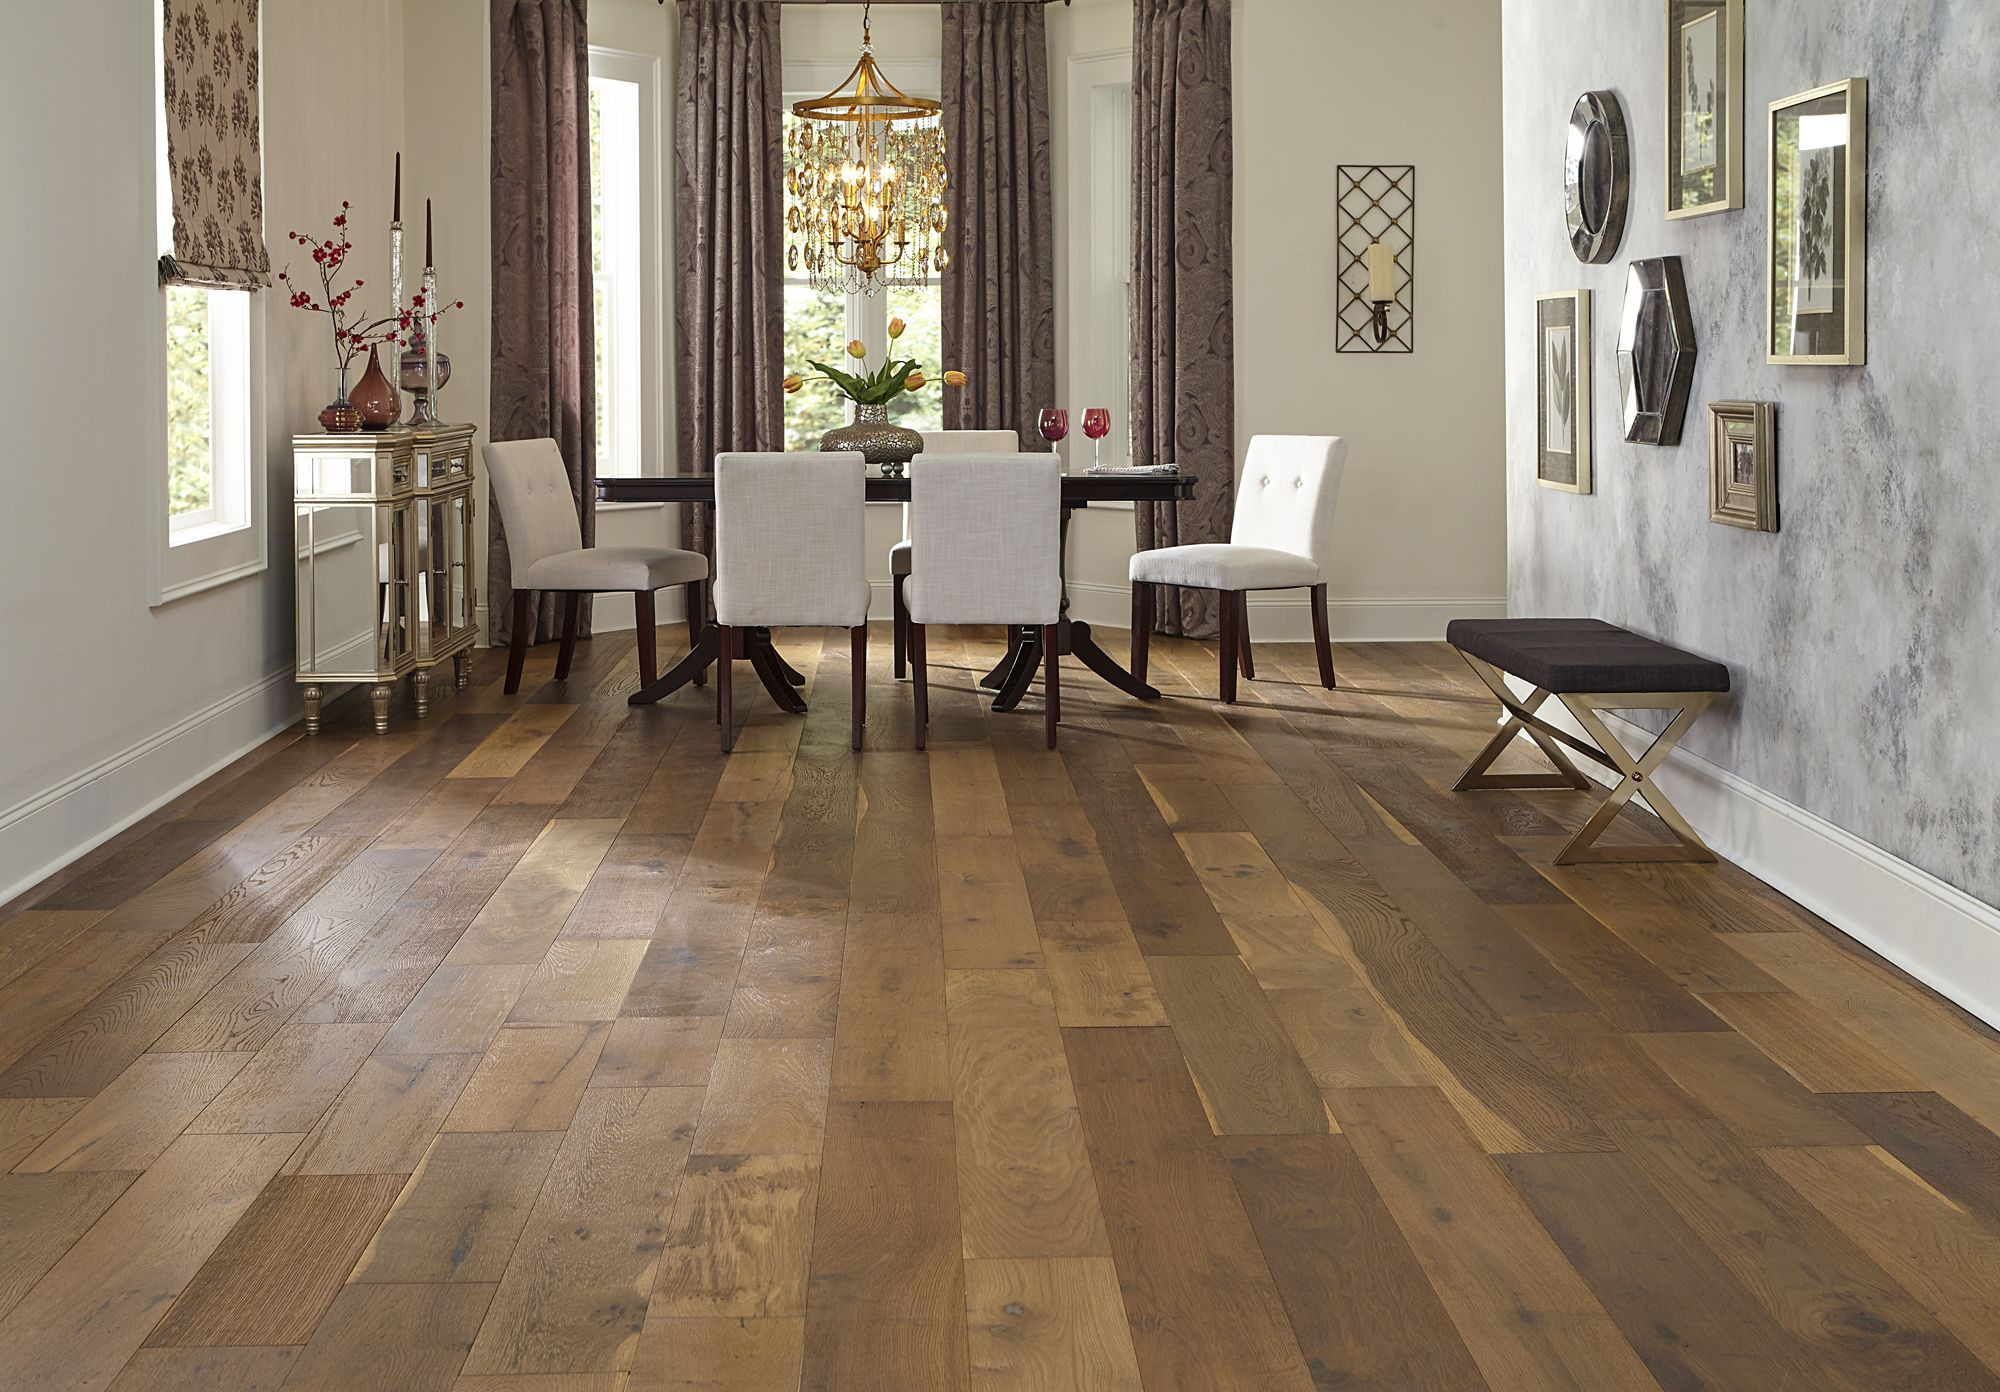 16 Awesome Engineered Hardwood Flooring Dalton Ga 2024 free download engineered hardwood flooring dalton ga of 7 1 2 wide planks and a rustic look bellawood willow manor oak has inside 7 1 2 wide planks and a rustic look bellawood willow manor oak has a stori